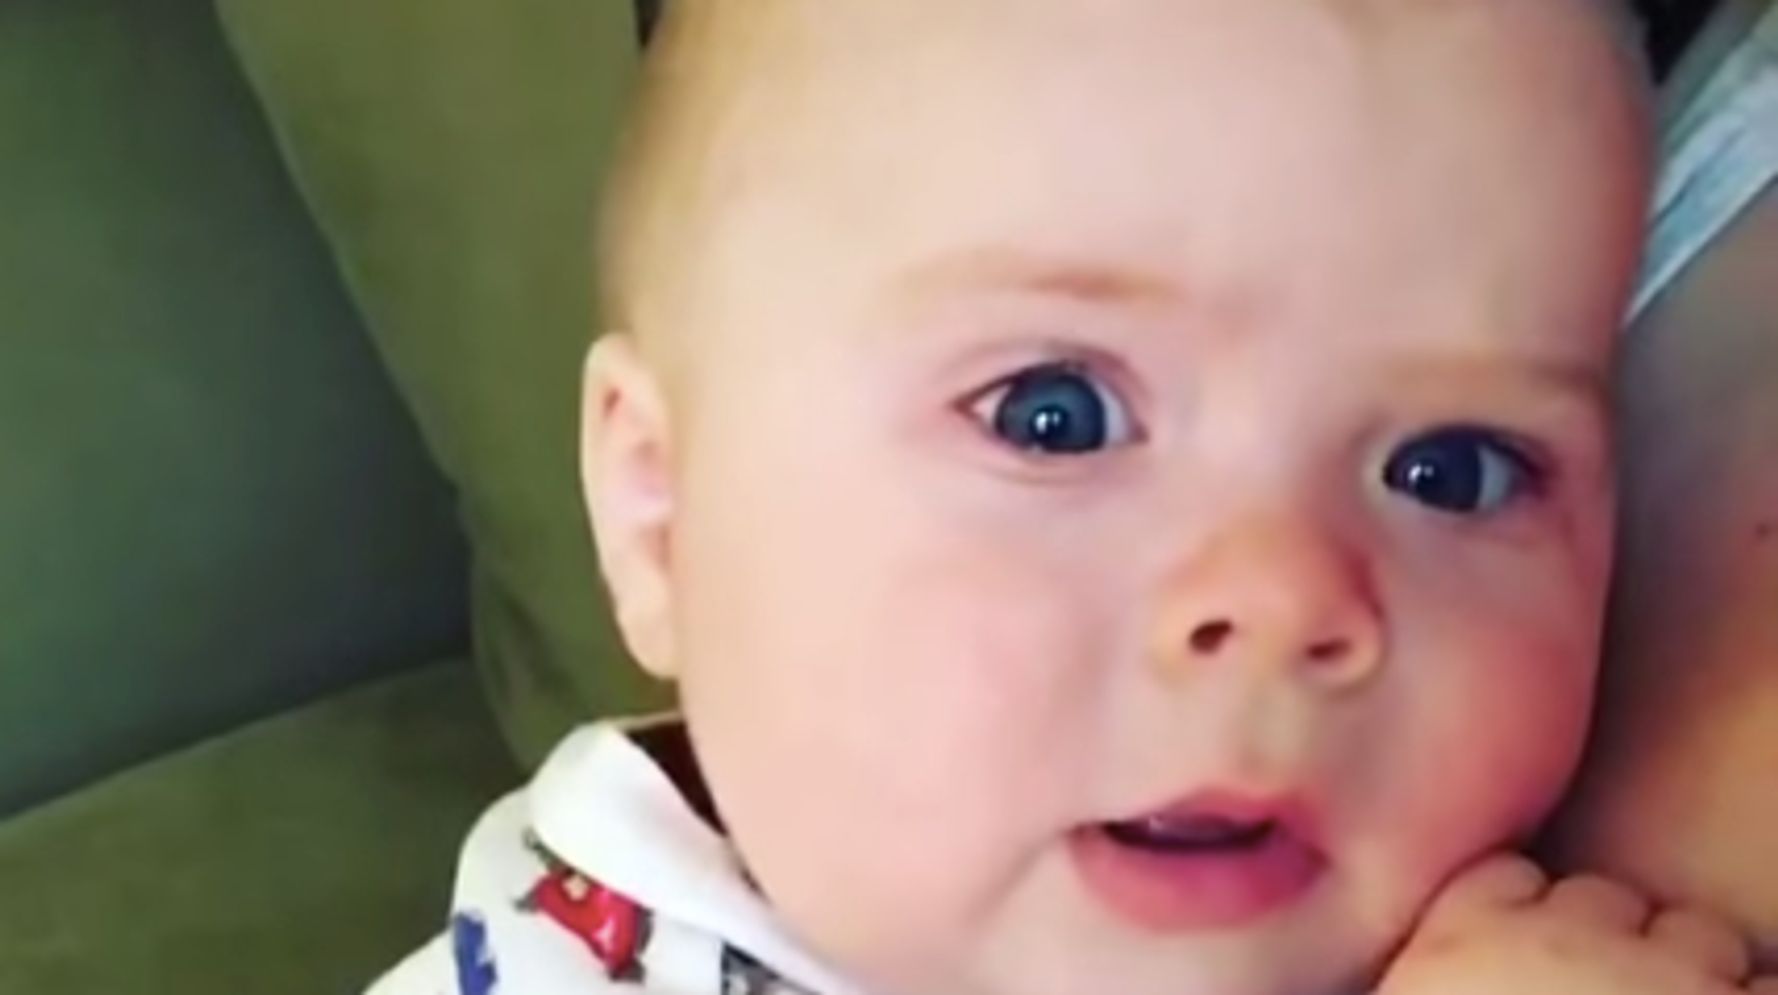 This Baby Sneezed And Had A Perfectly Appropriate Reaction | HuffPost Life